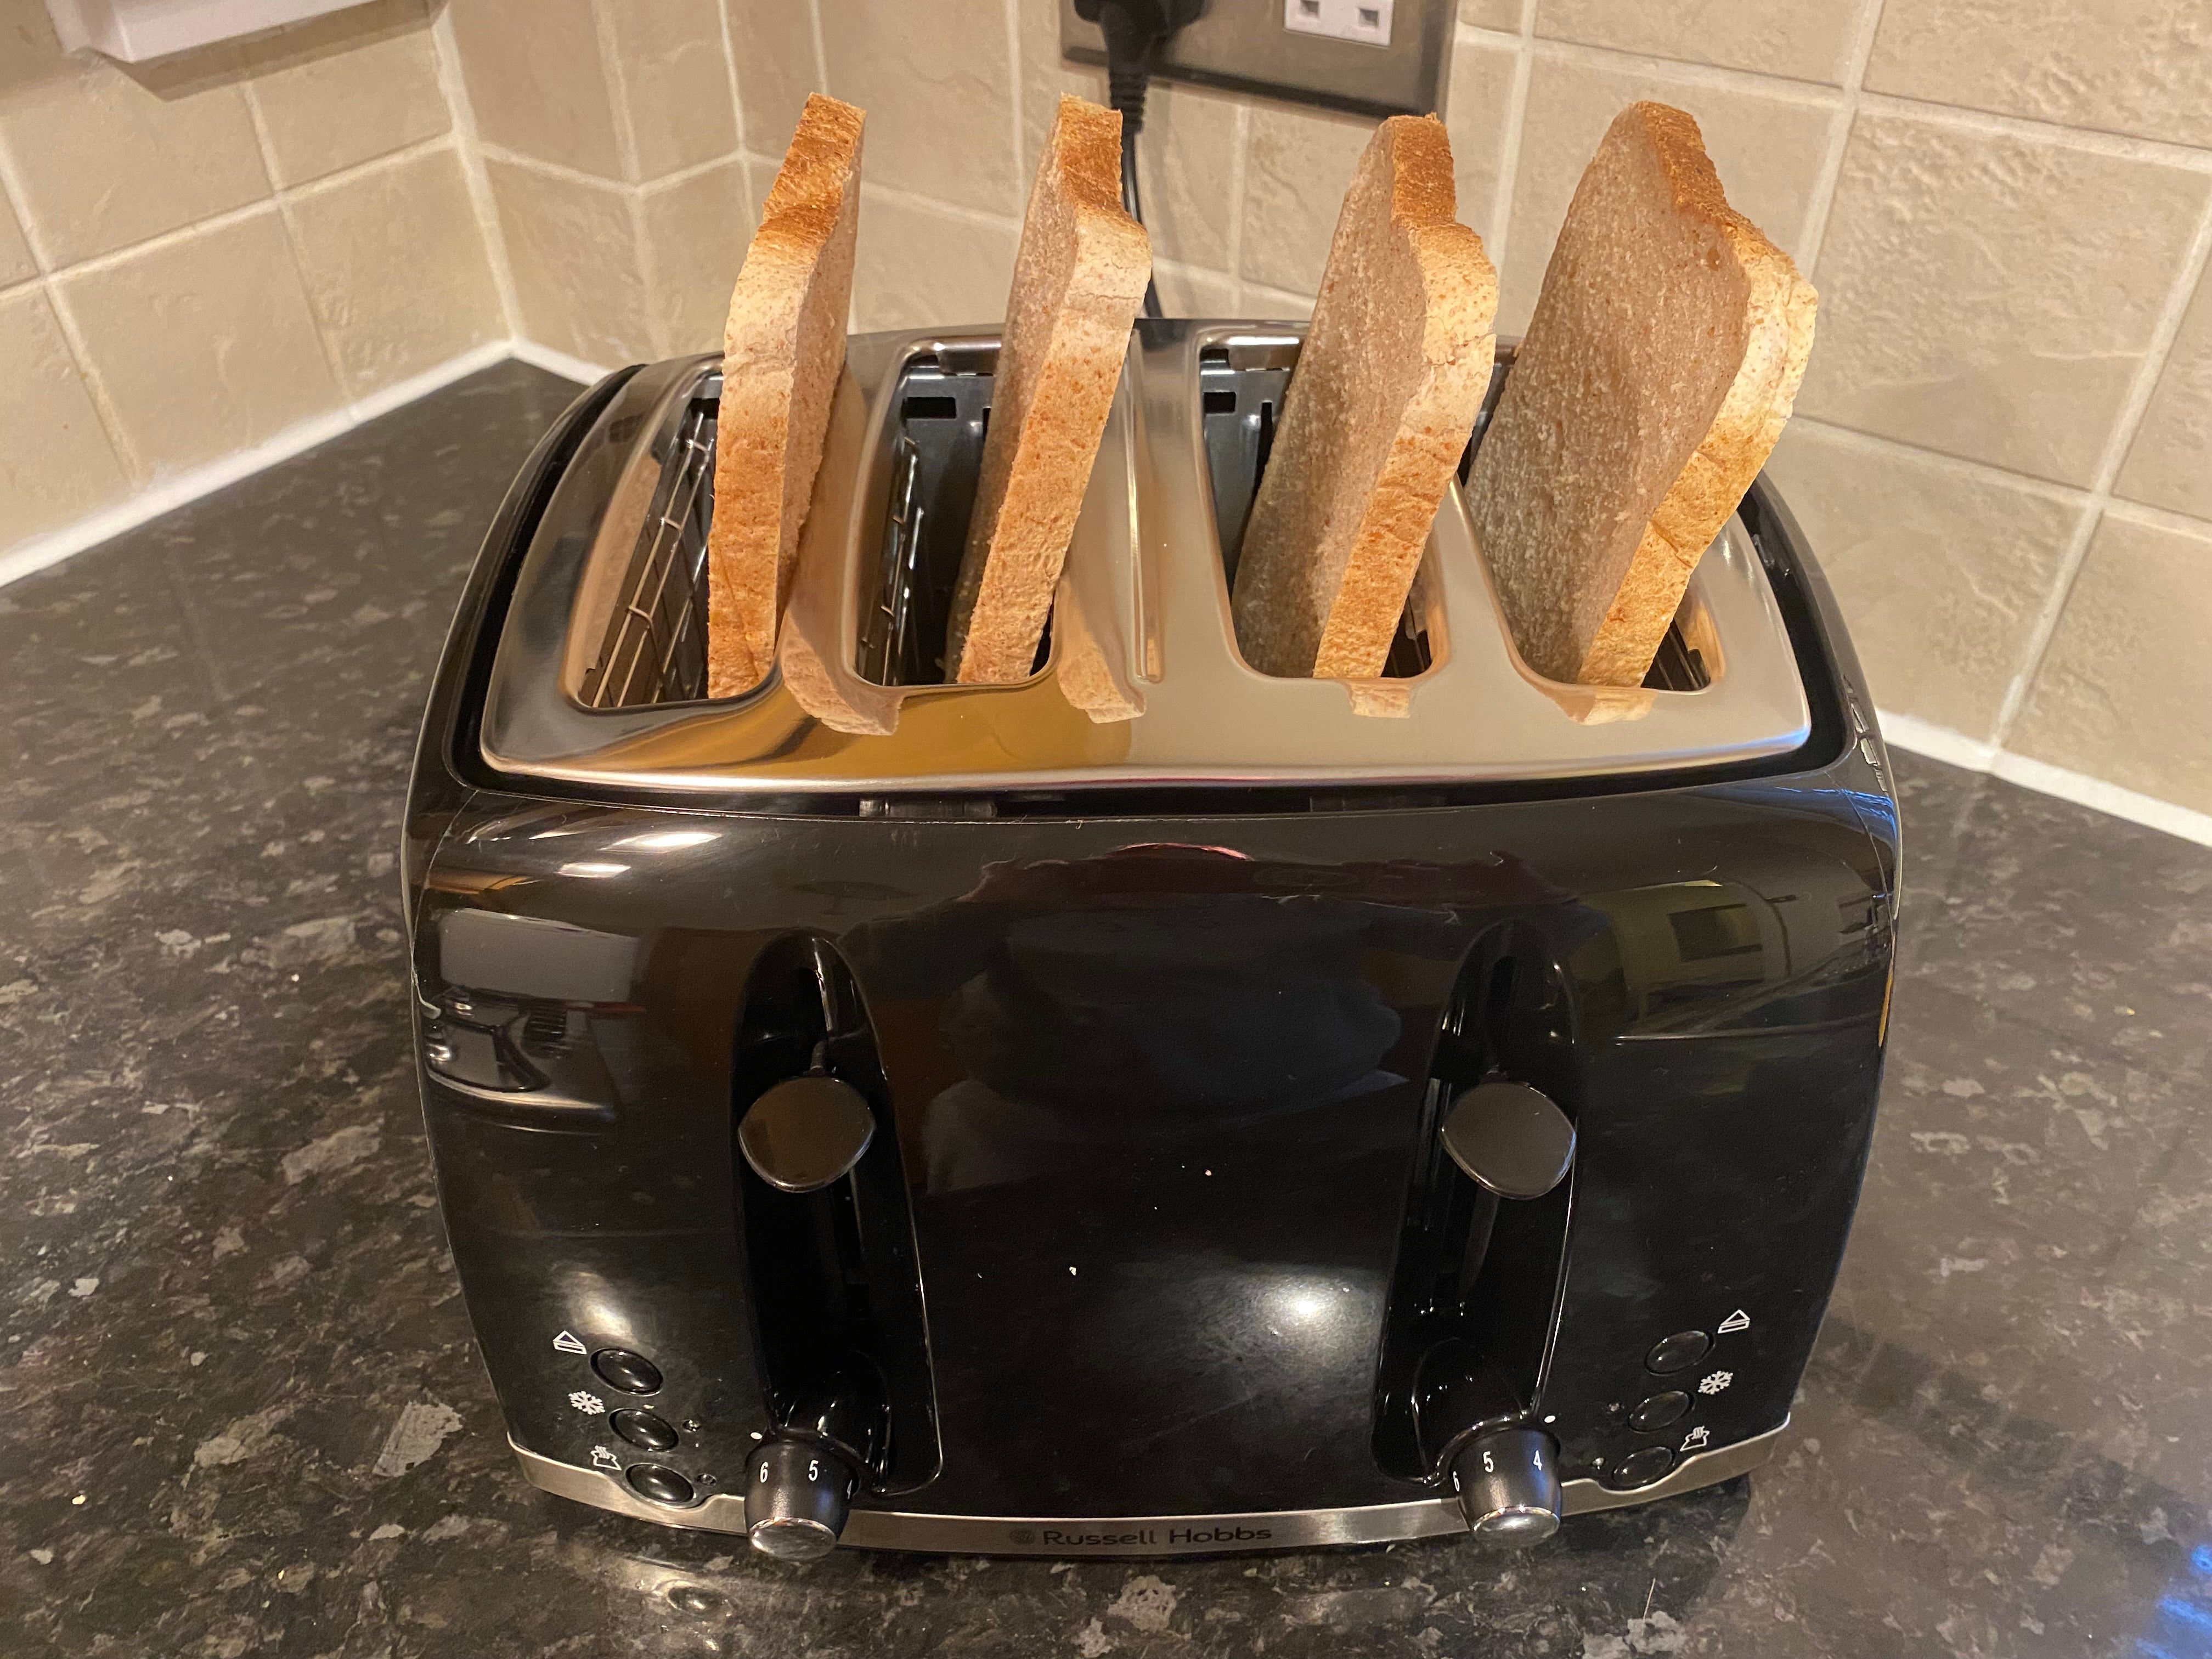 Toaster 4 Slice Toasters Best Rated Prime Wide Slot Stainless Steel Toaster Four Slice Bread Bagel Toaster Defrost/Reheat/Cancel Function Removable Crumb Tray 7-Shade Setting Extra Wide Slots 